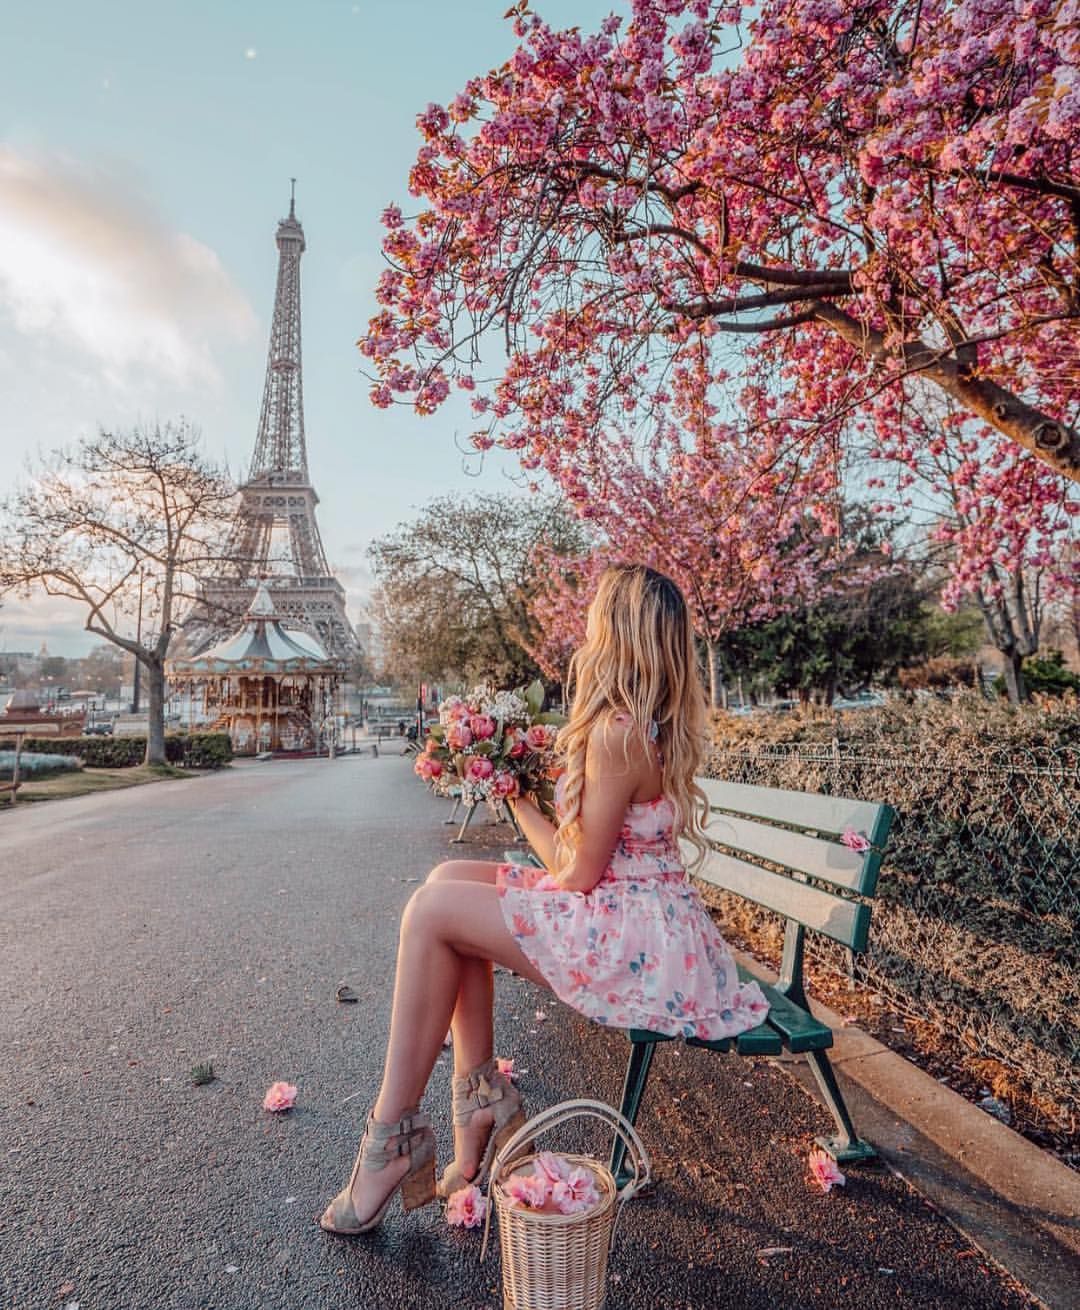 3182 Likes 43 Comments   FASHION INSPO  stylecosmopolitan on  Instagram So beautiful  t  Eiffel tower pictures Summer time love  Paris photography